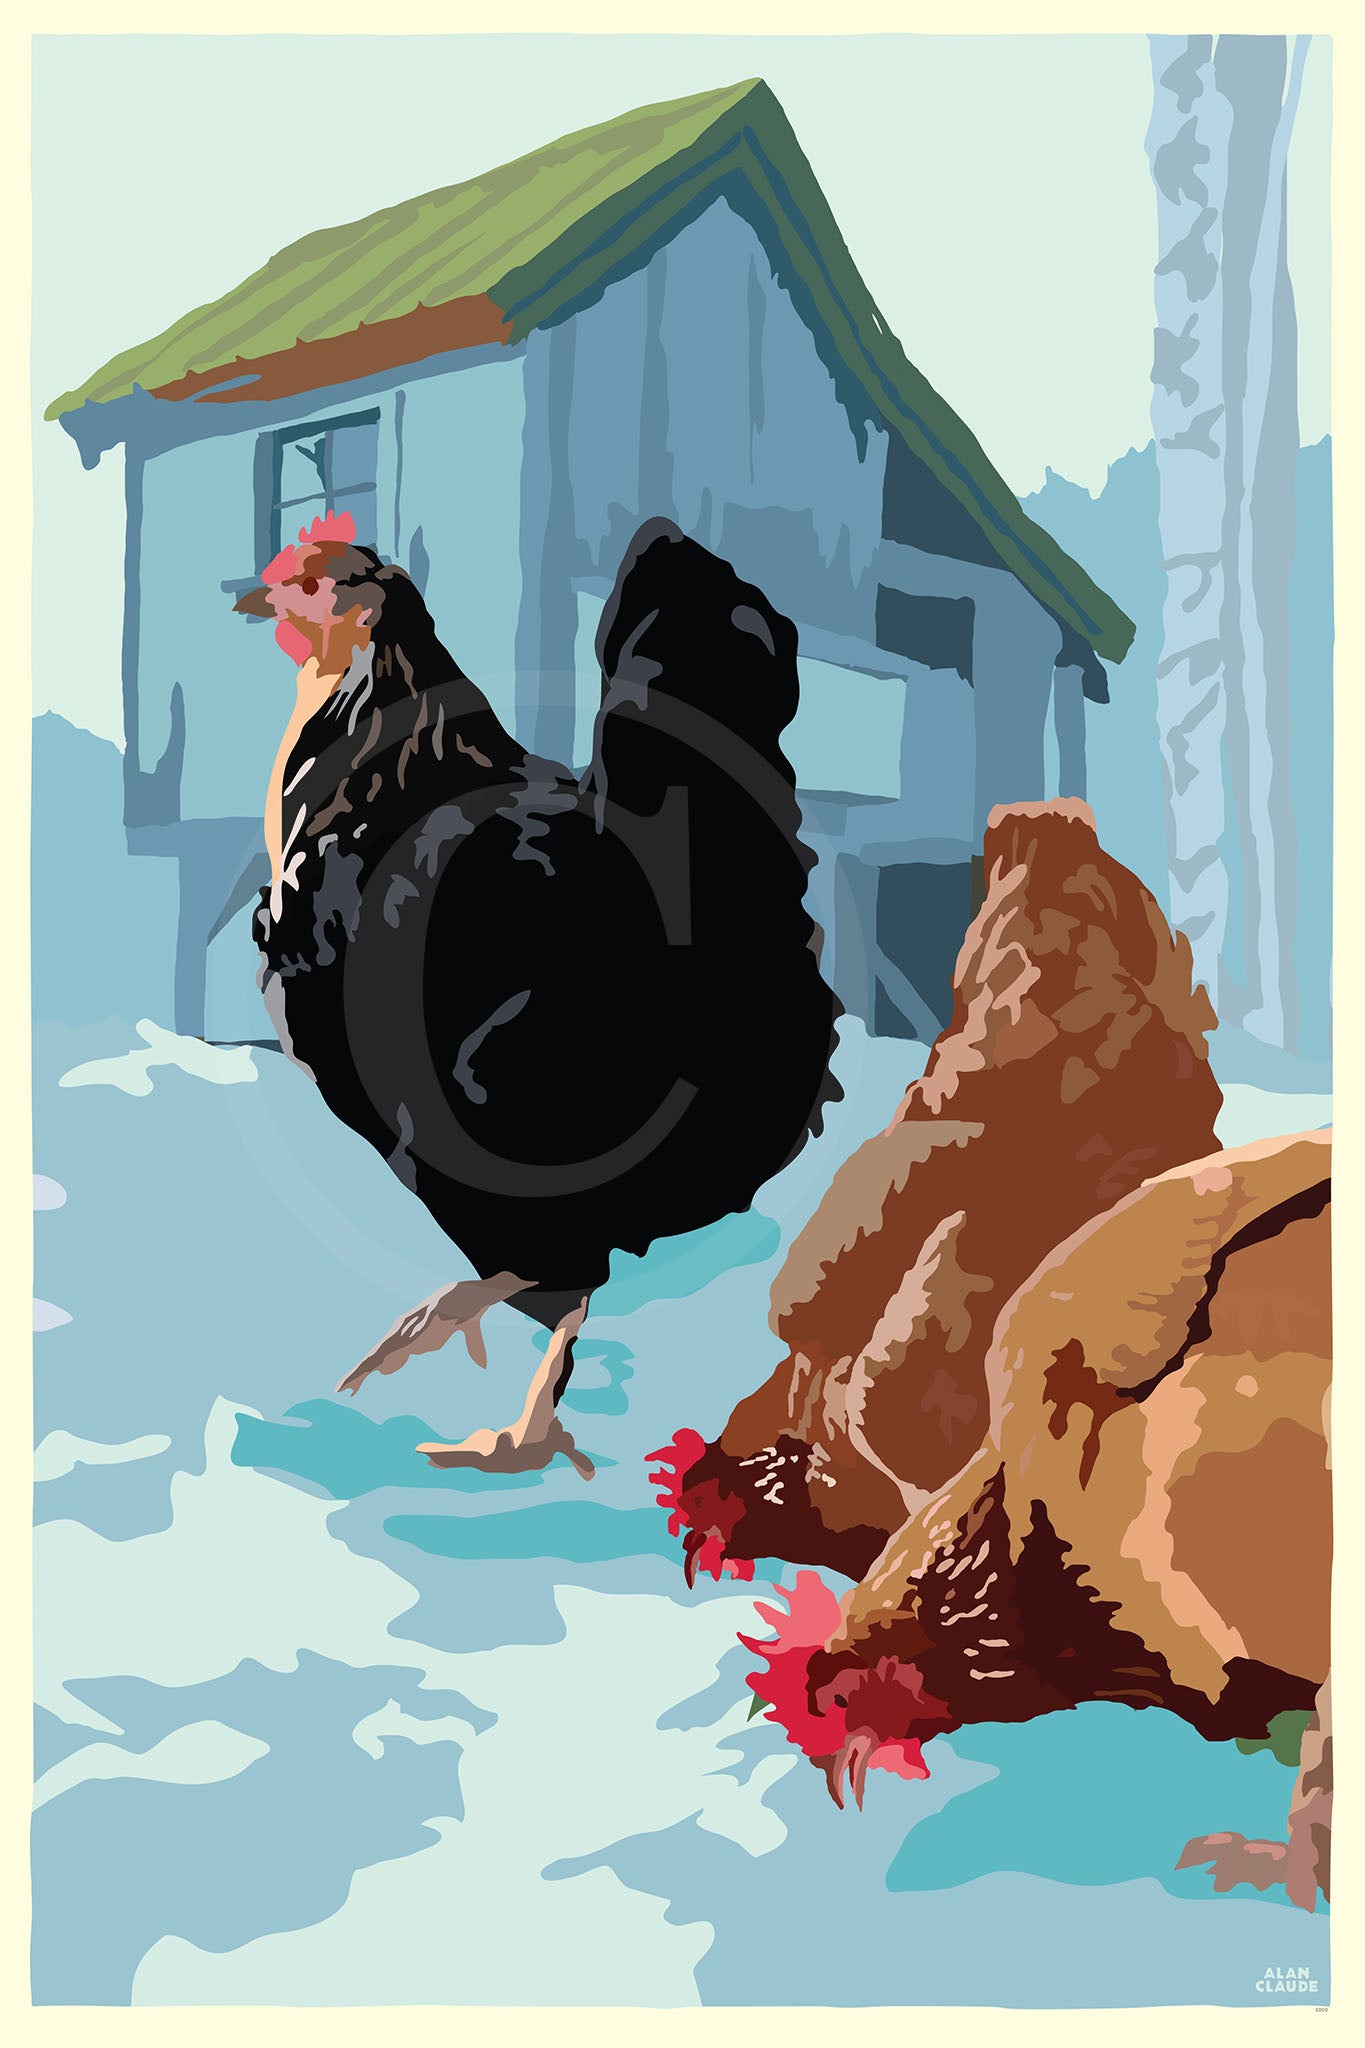 Winter Chickens Art Print 24" x 36" Wall Poster By Alan Claude - Maine